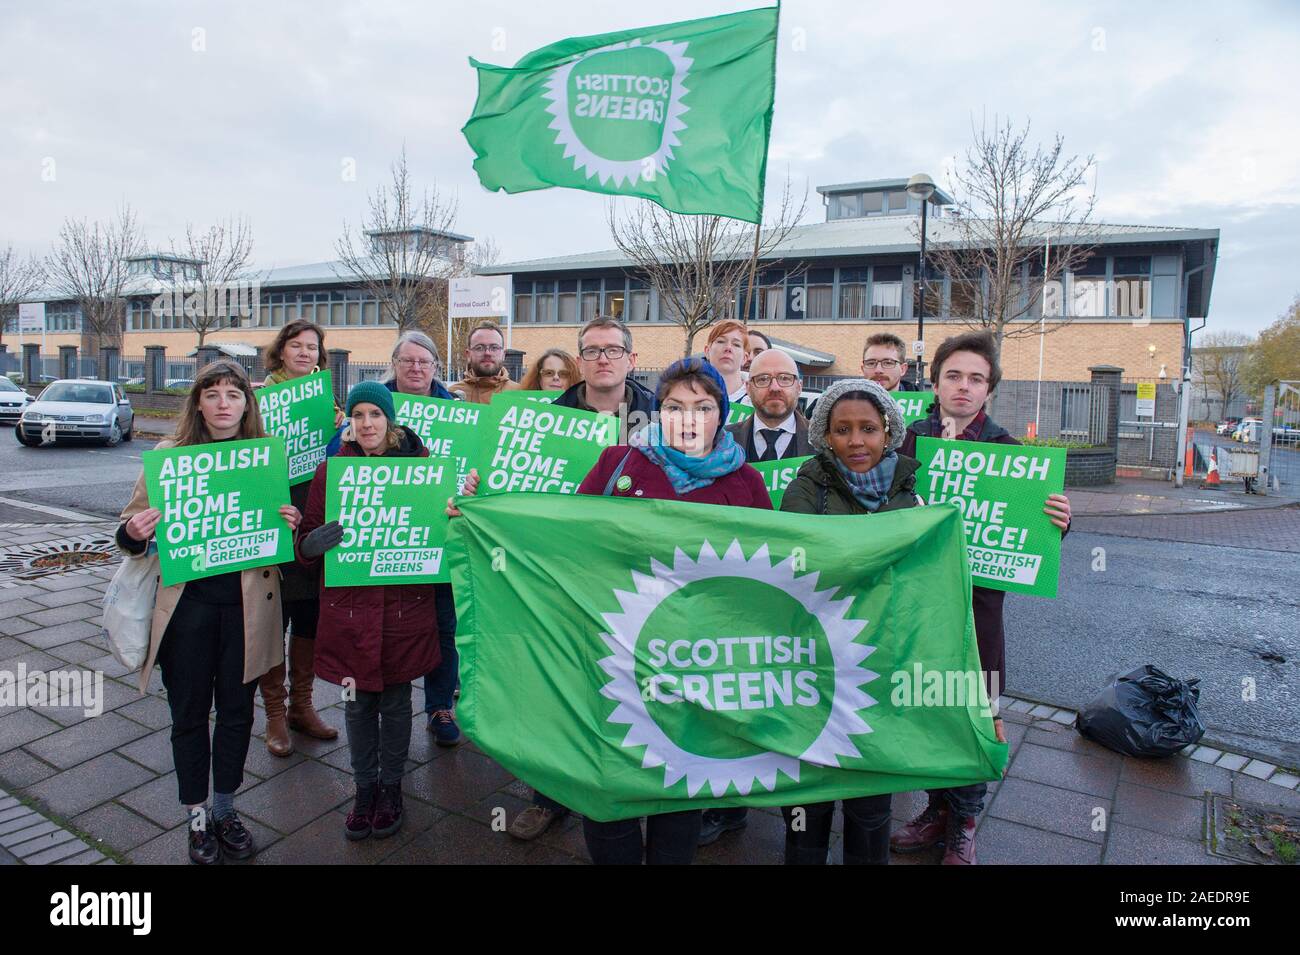 Glasgow, UK. 22 November 2019. Pictured: (front row left) Cllr Kim Long and (front row right) Mandia Kanyange - who has gone through the asylum process, stands together with Patrick Harvie MSP - Co Leader of the Scottish Green Party campaigns with local candidates, councillors and party members for the abolition of the home office.  Credit: Colin Fisher/Alamy Live News. Stock Photo